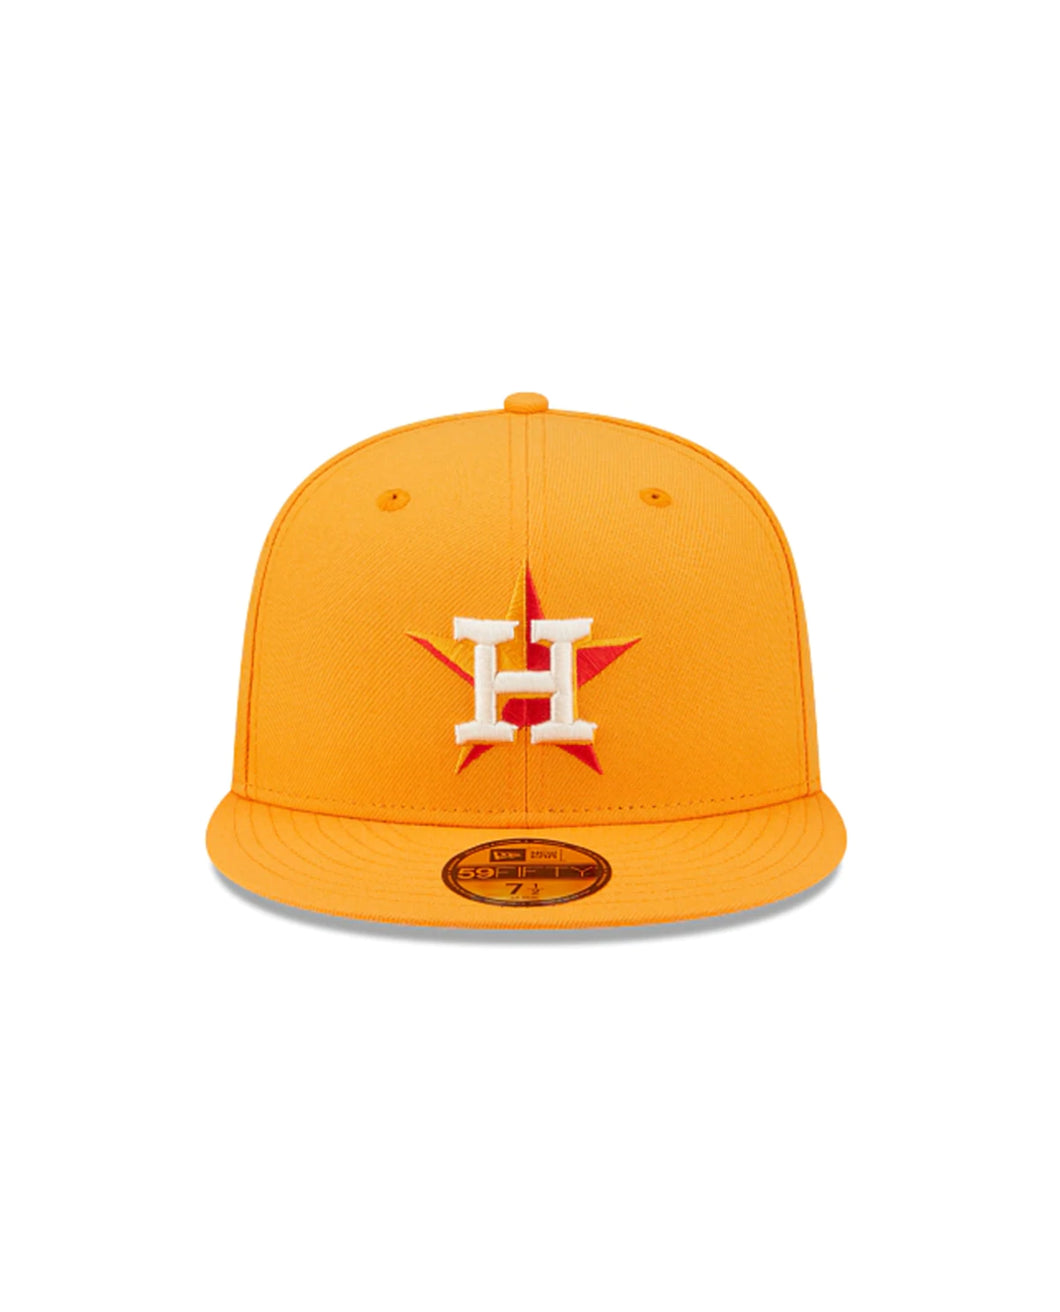 59Fifty Huston Astros World Series Fruit Pack Fitted Cap